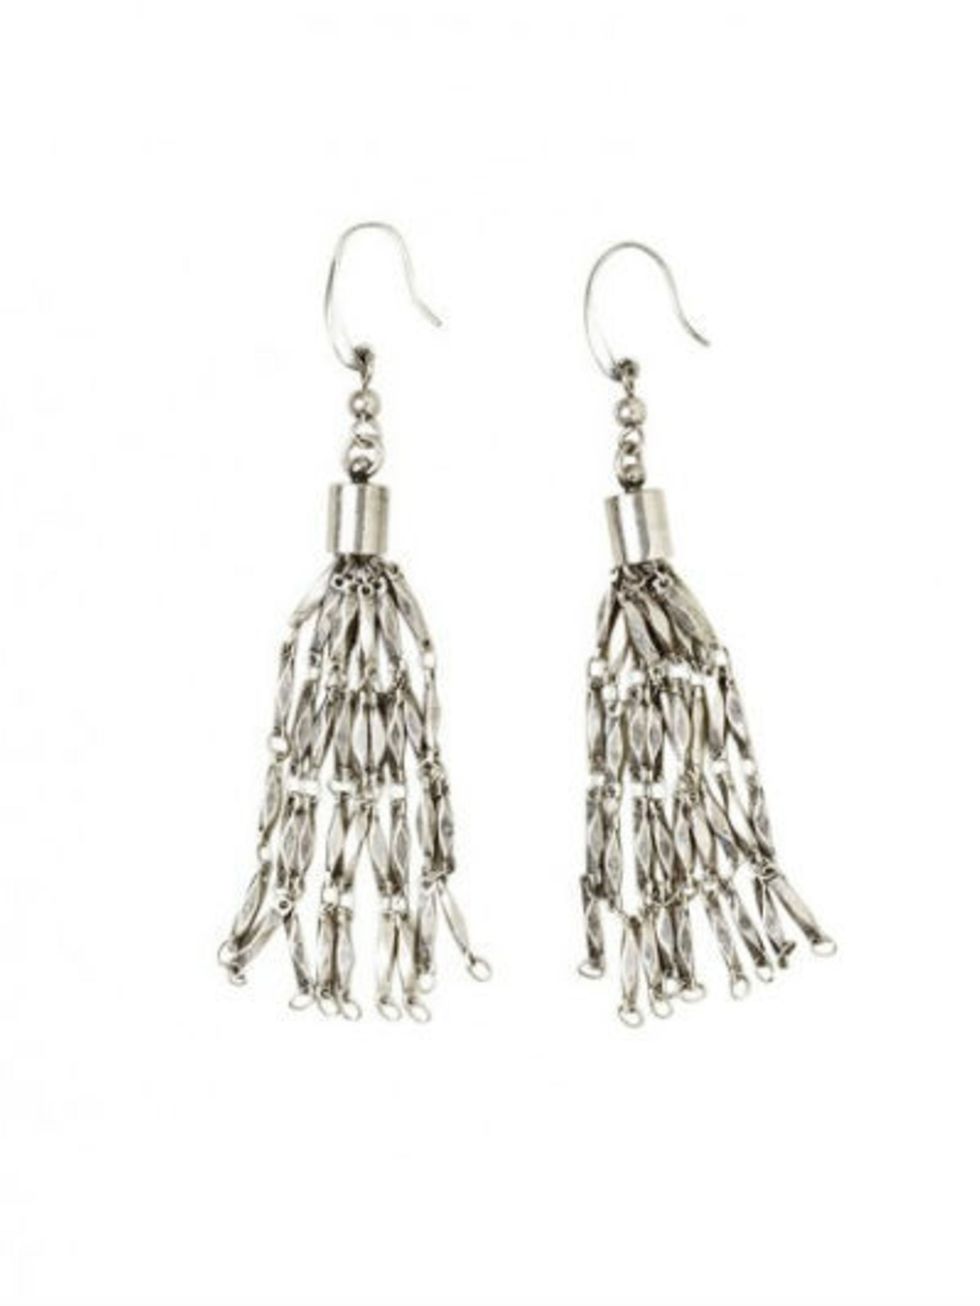 Earrings, Product, White, Metal, Body jewelry, Natural material, Silver, Craft, Creative arts, Jewelry making, 